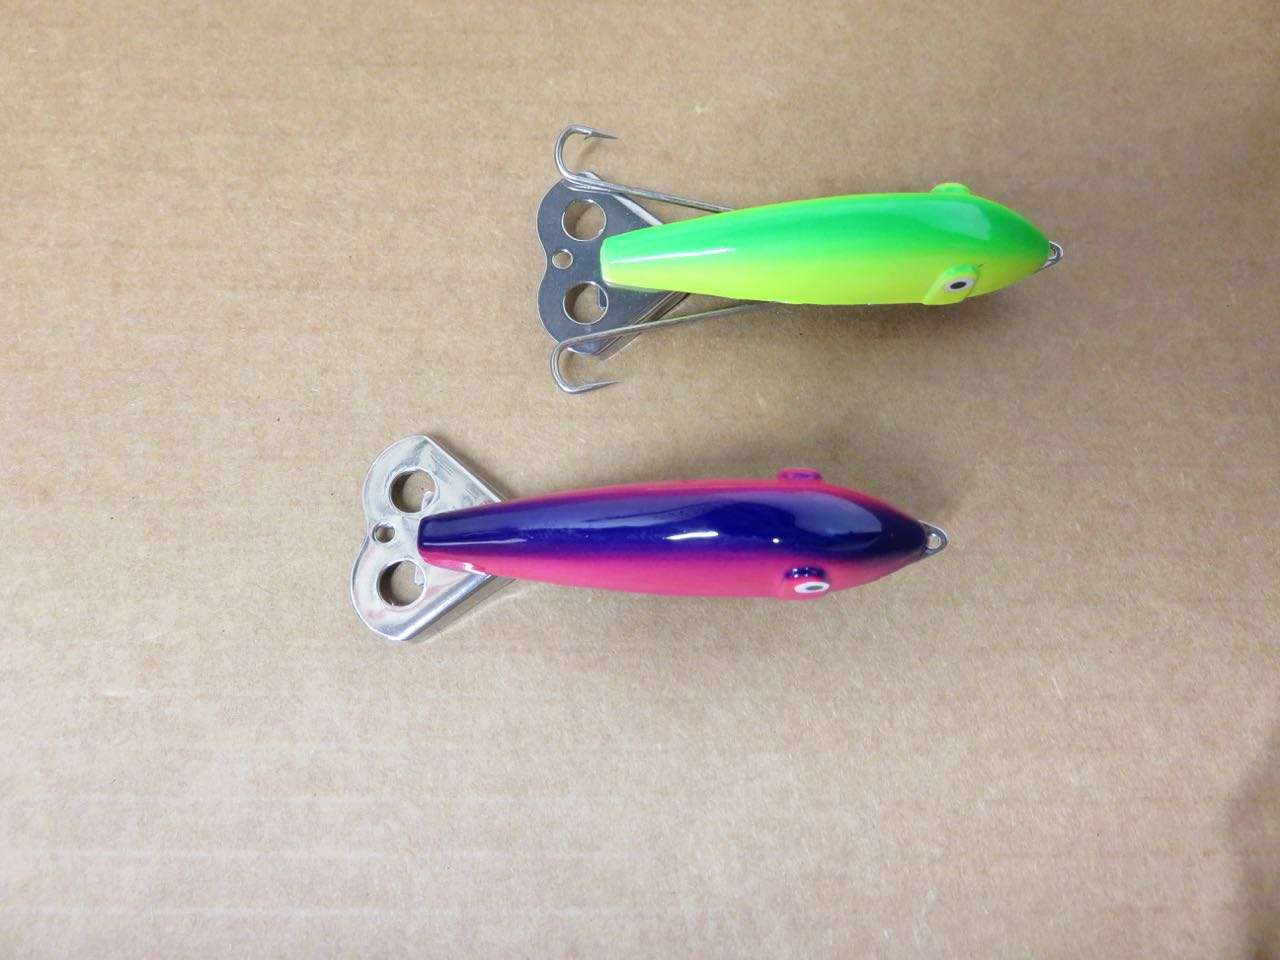 The worst lure ever? - Fishing Tackle - Bass Fishing Forums